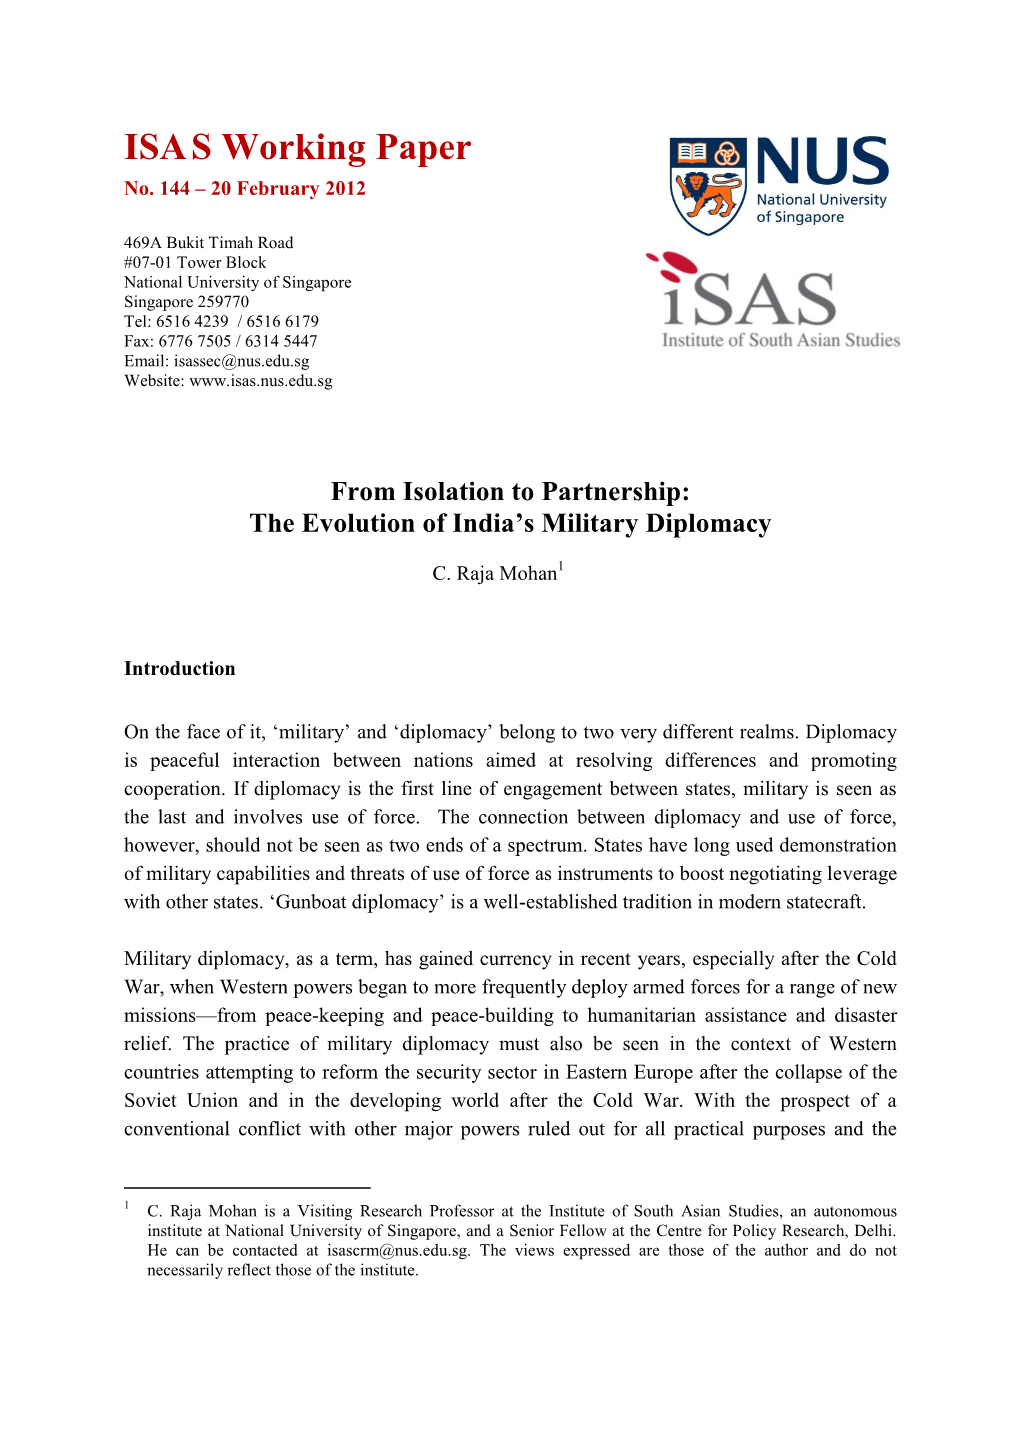 From Isolation to Partnership: the Evolution of India's Military Diplomacy